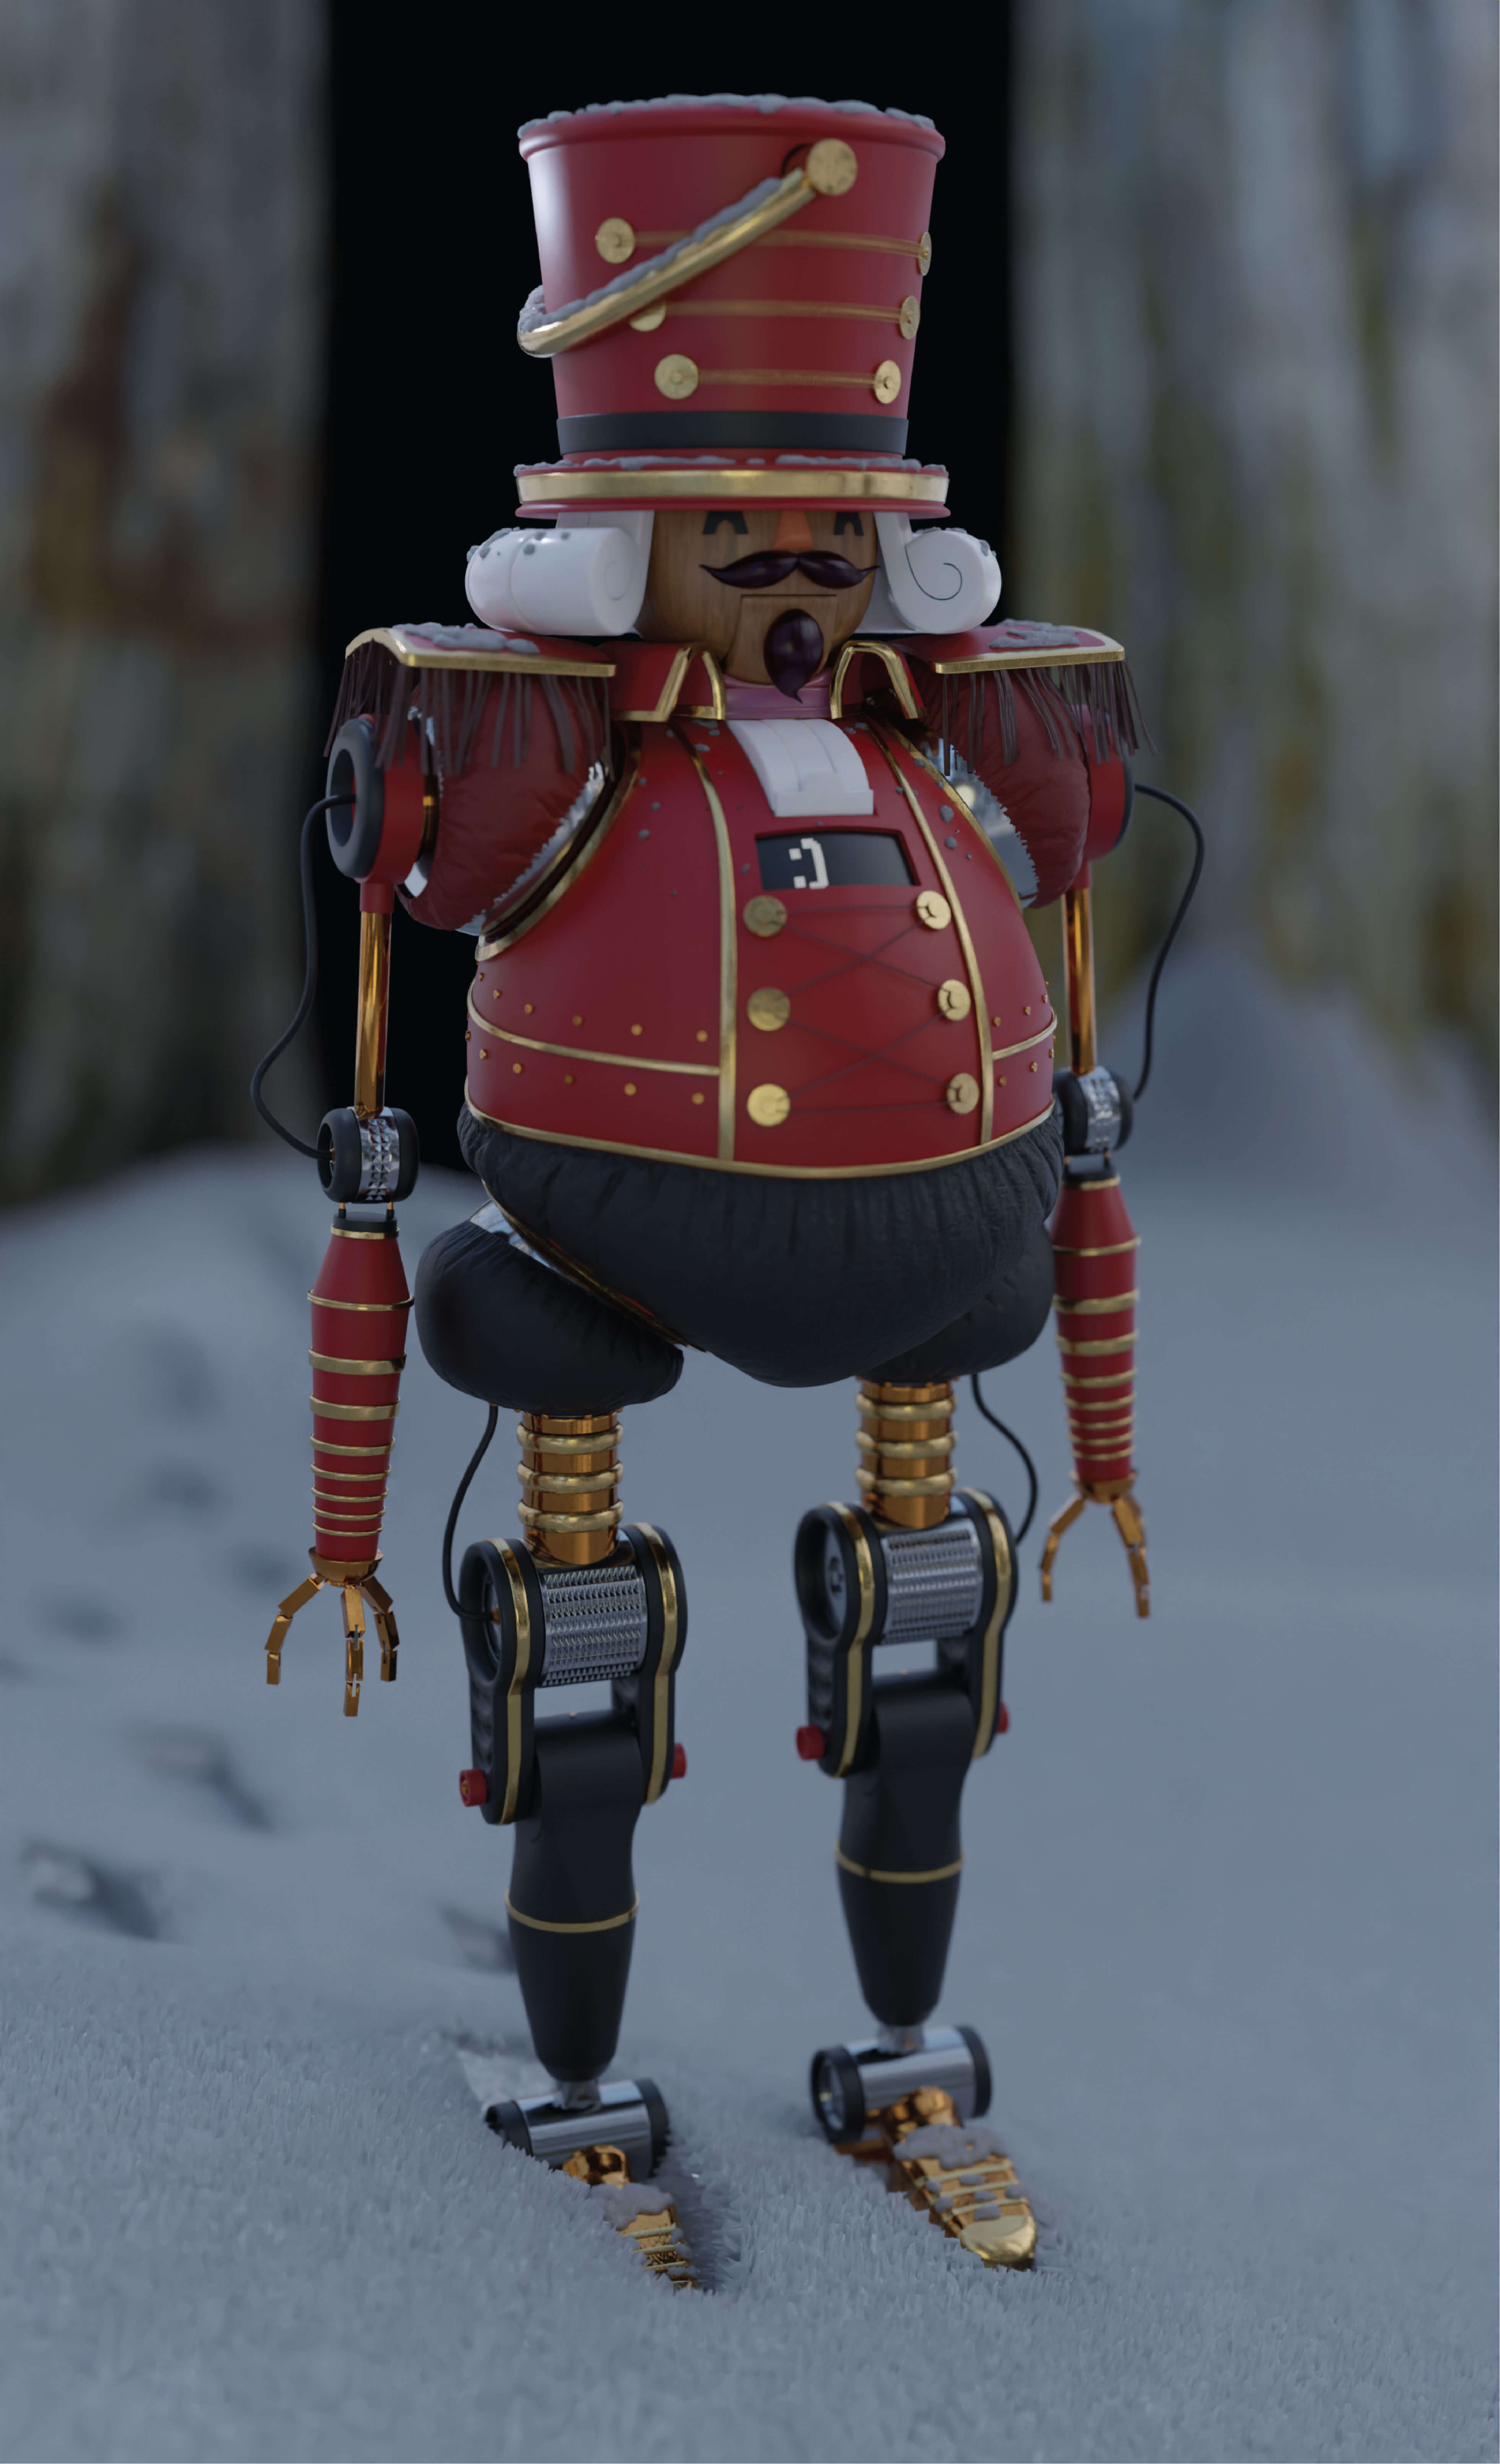 Render of nutcracker without all scene elements or post-processing